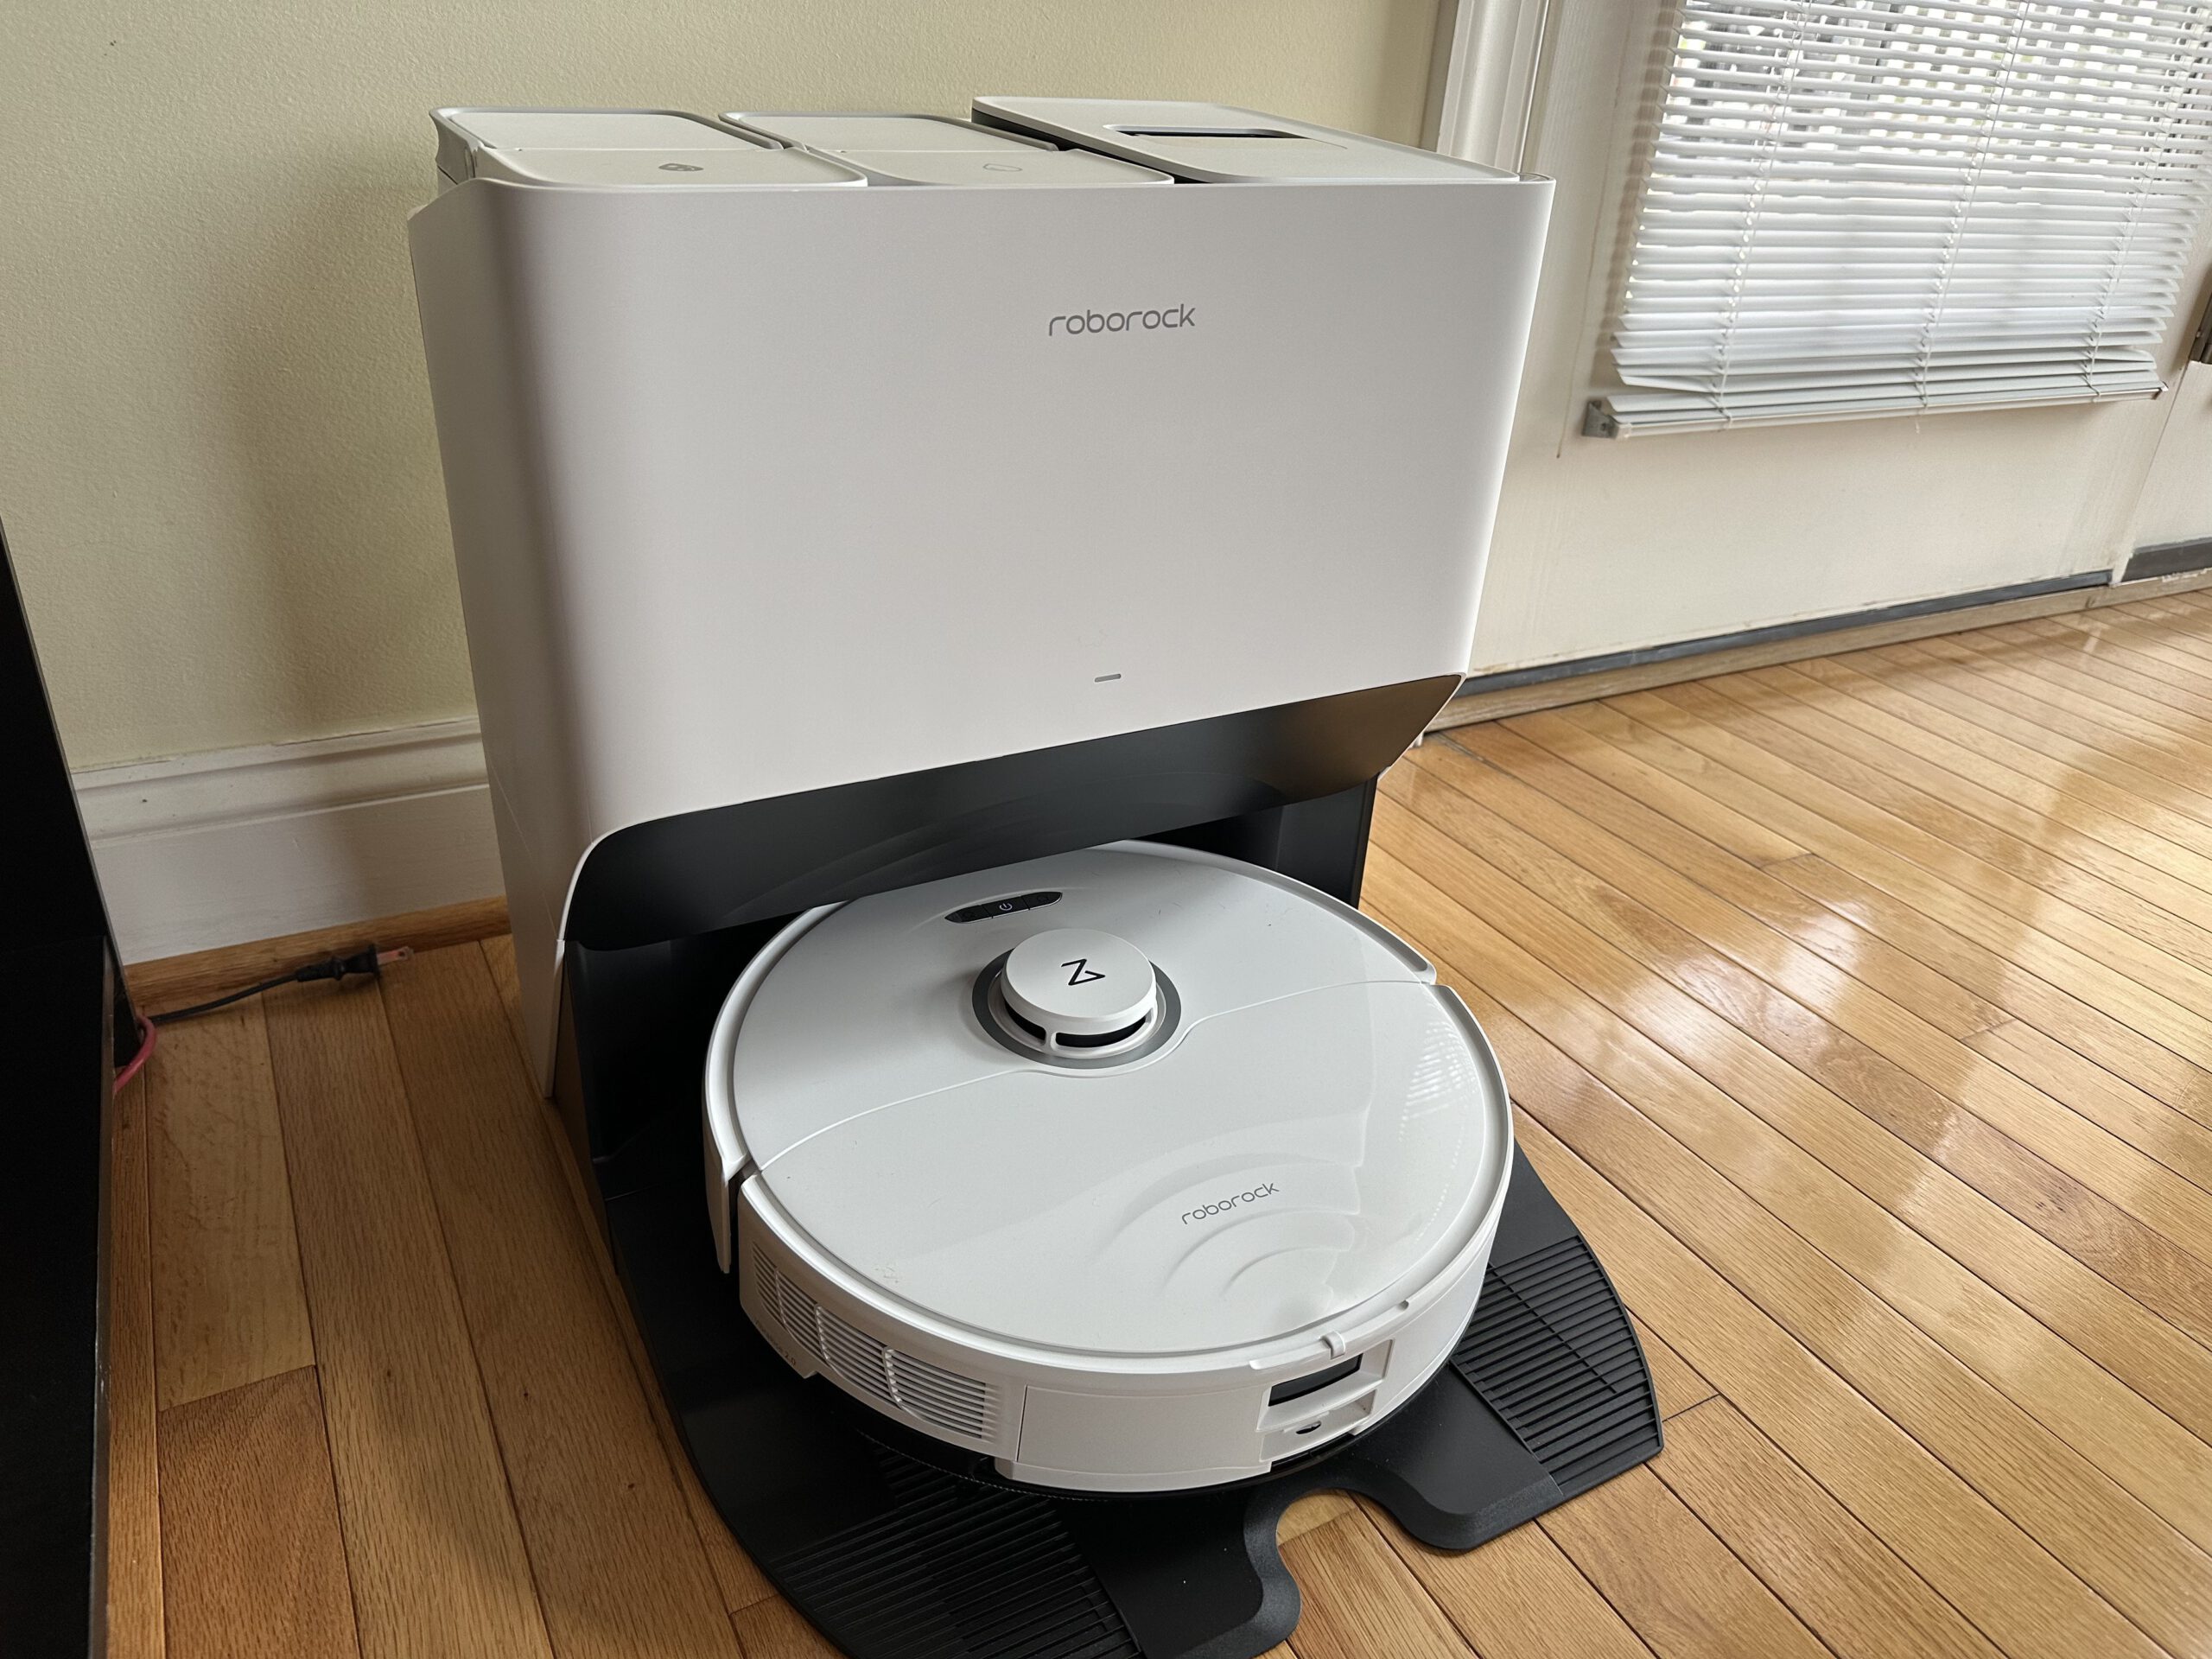 The Roborock S8 Pro Ultra in a white color, resting on its recharging base